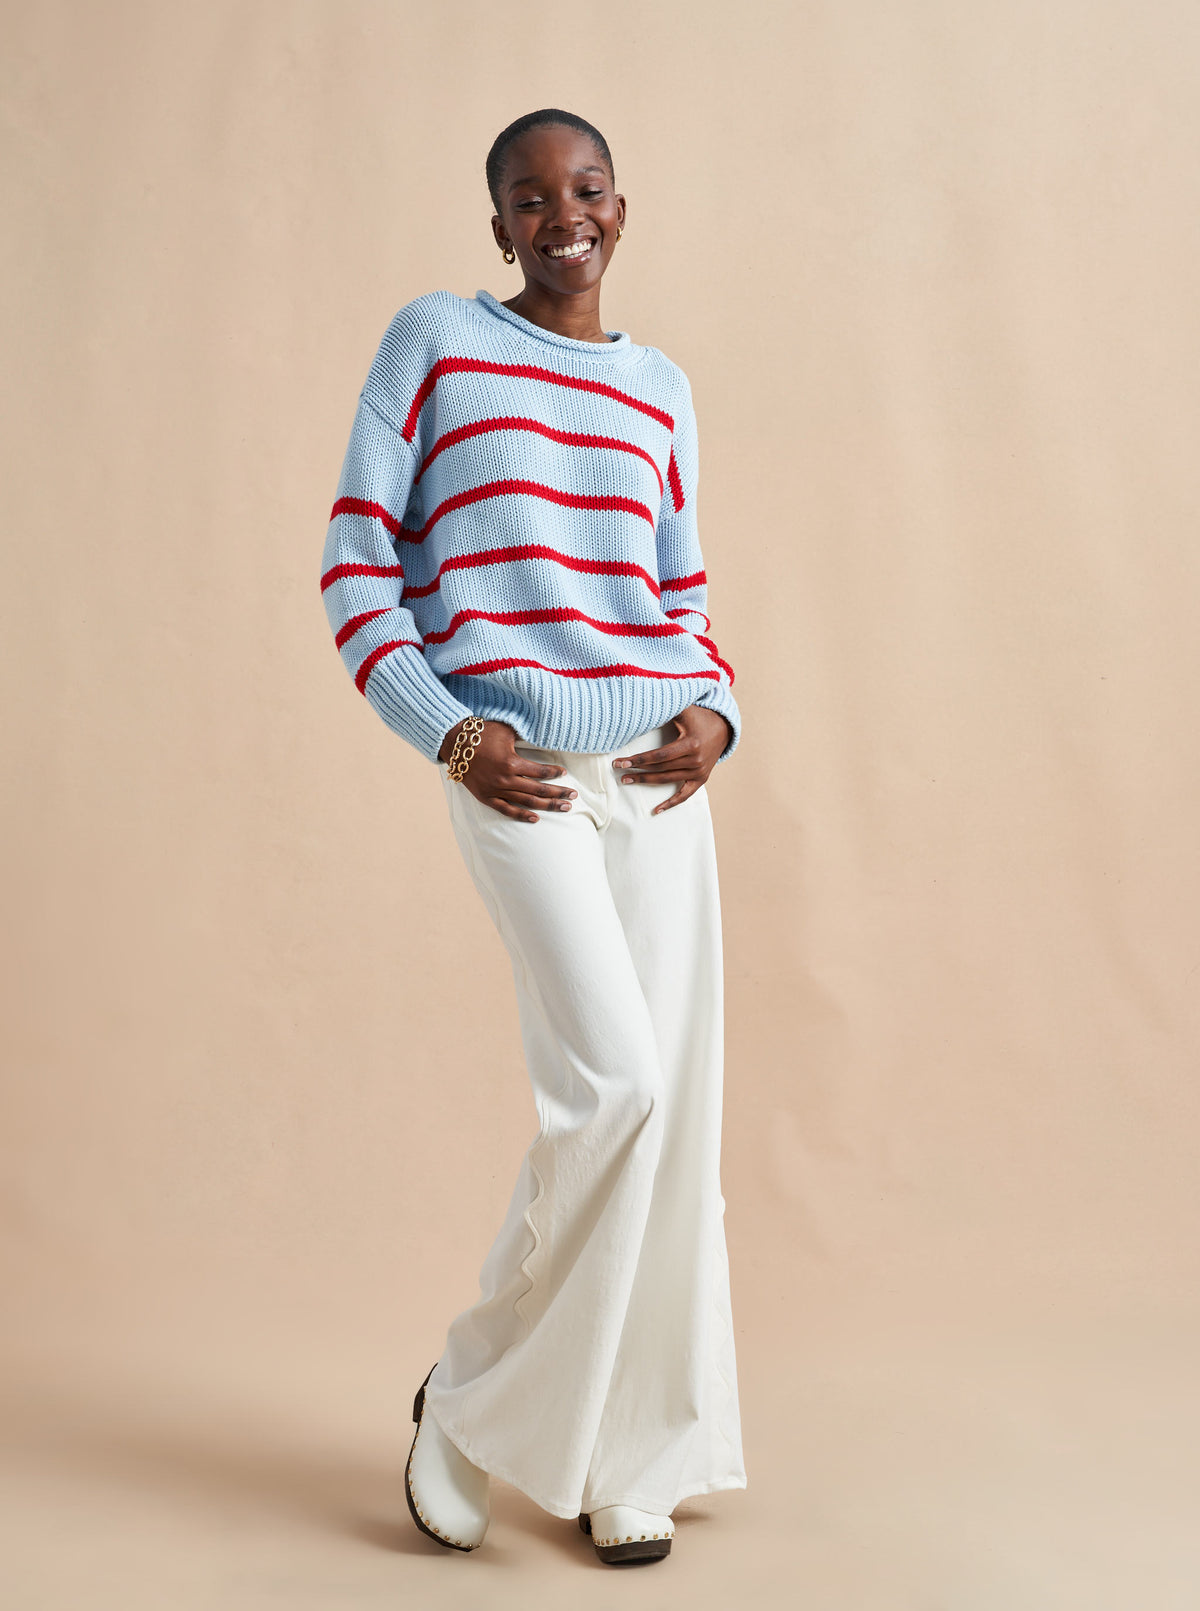 Your favorite Marin Sweater now in comfy cotton. Our newest member of the sweater family features a rollneck in that oversize, chunky weight you know and love us for.